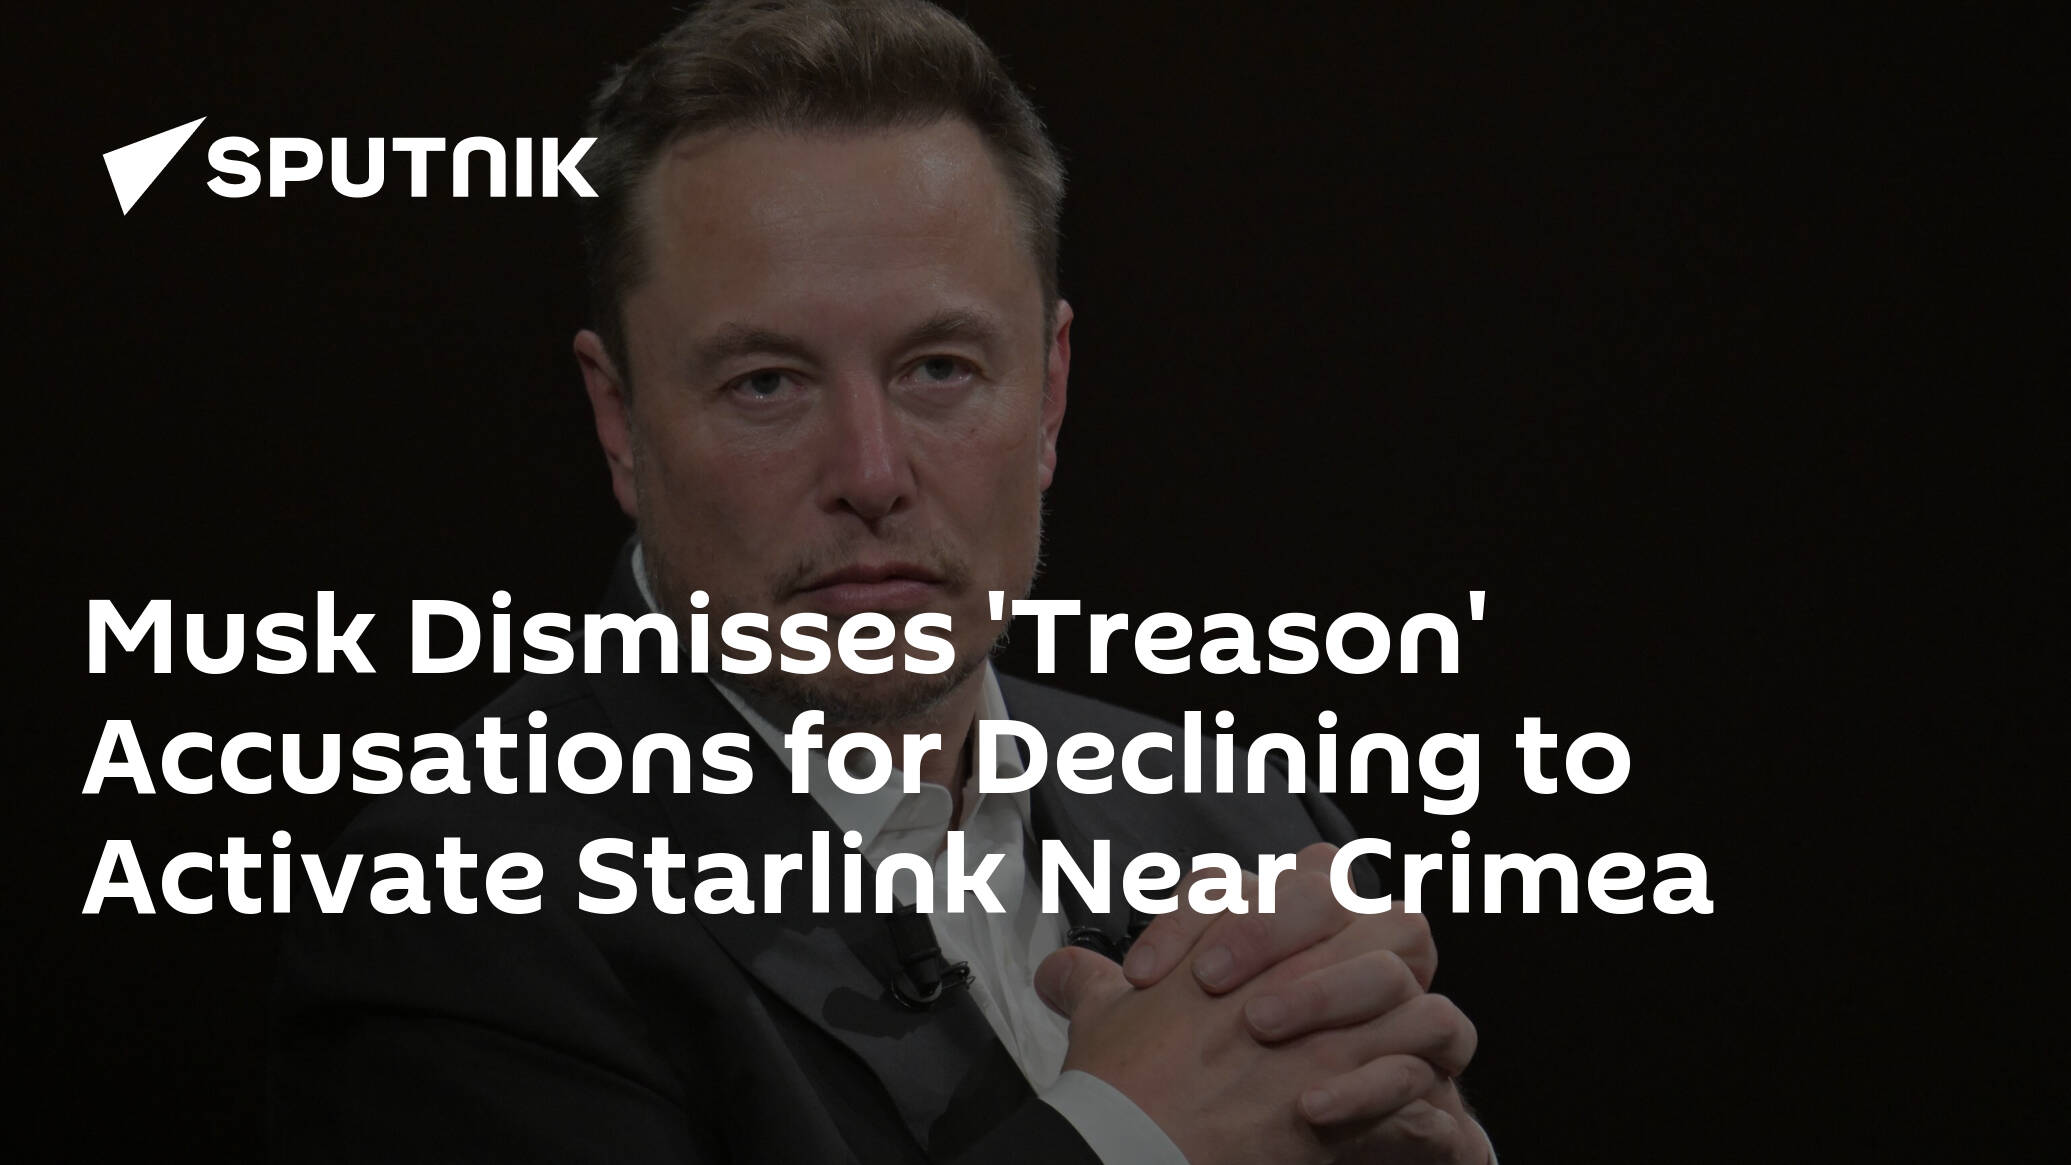 Musk Dismisses 'Treason' Accusations for Declining to Activate Starlink Near Crimea